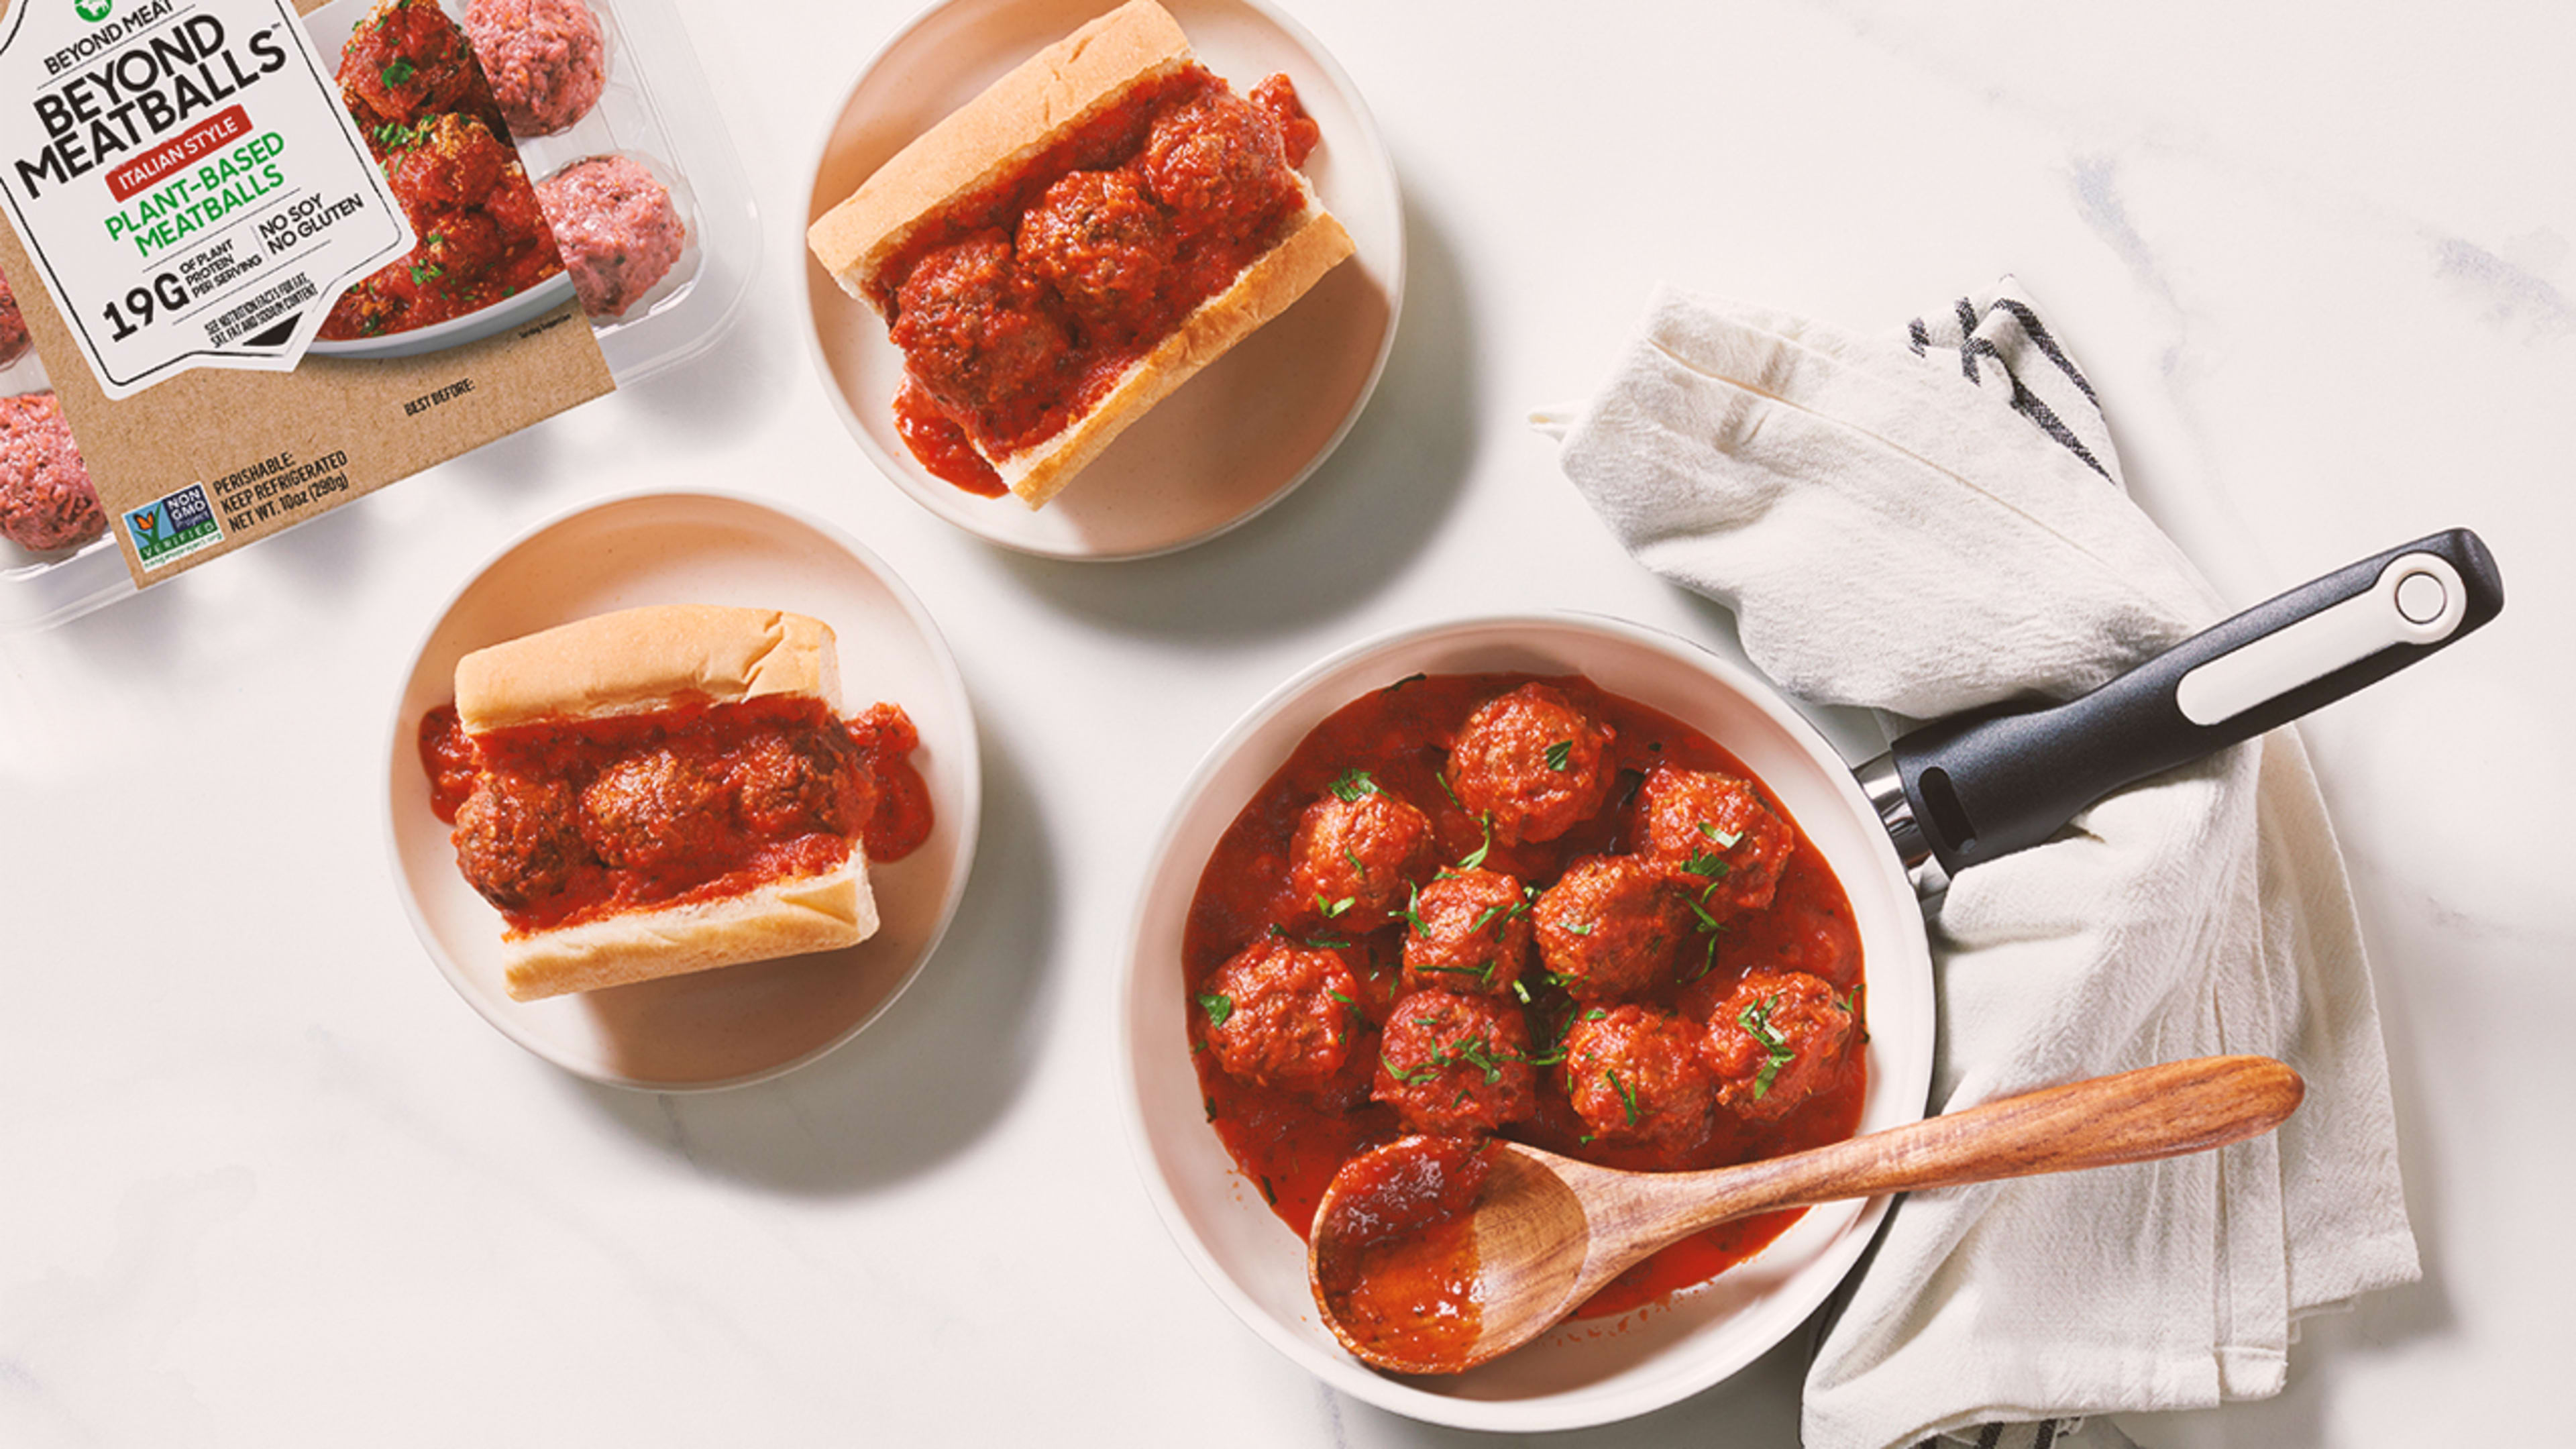 Walmart, meet Beyond Meatballs. They debut at the retailer just in time for summer